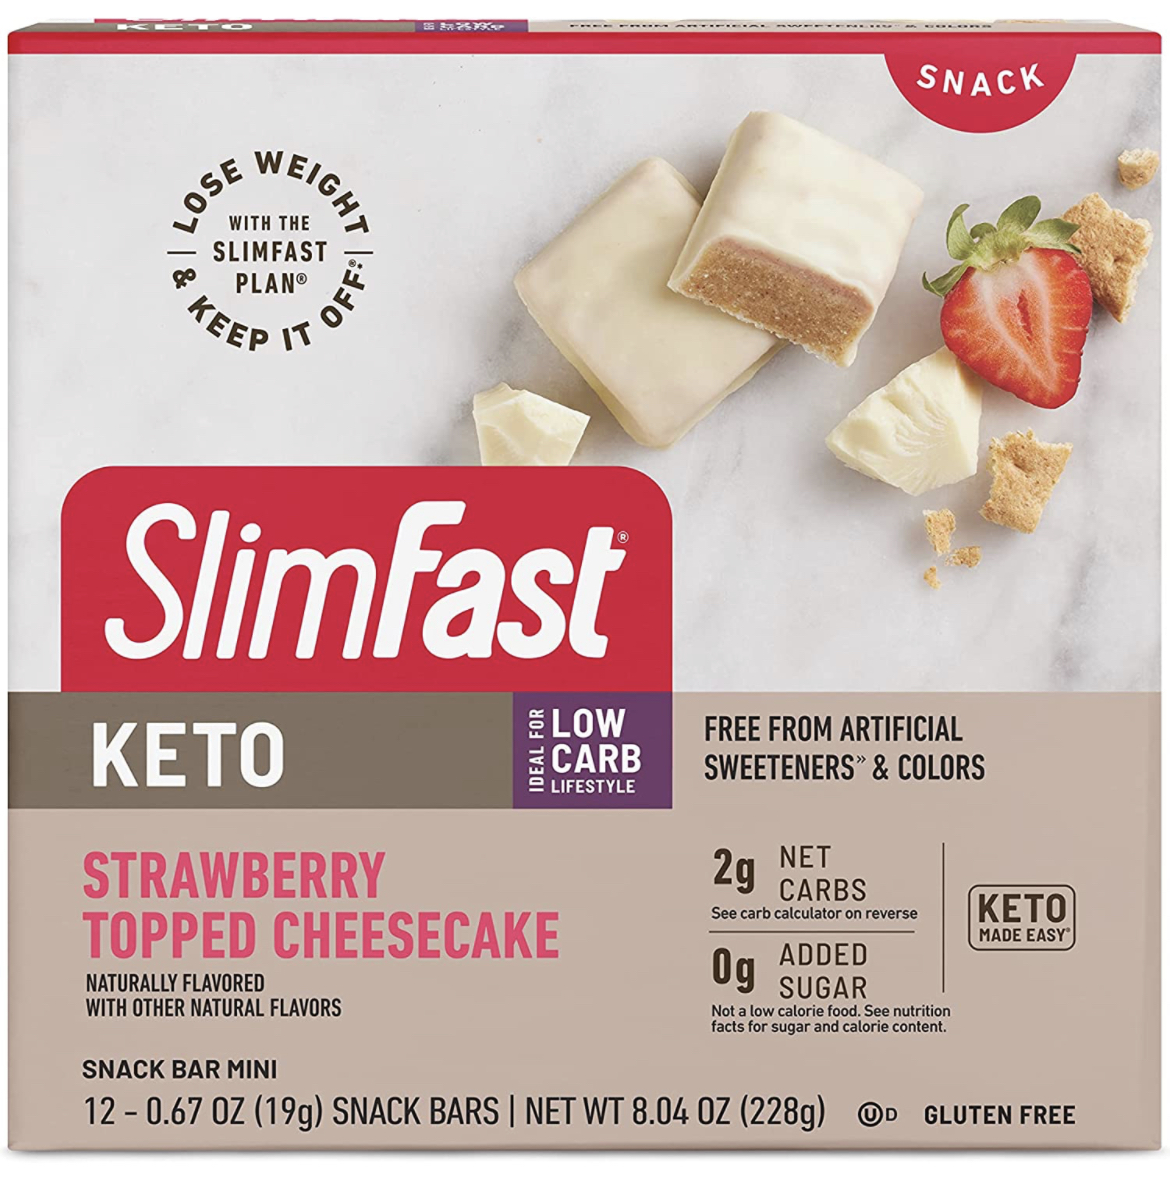 SlimFast Low Carb Snacks, Keto Friendly for Weight Loss with 0g Added Sugar, Strawberry Topped Cheesecake Snack Bar Minis, 12 Count Box (Packaging May Vary) - $6.36